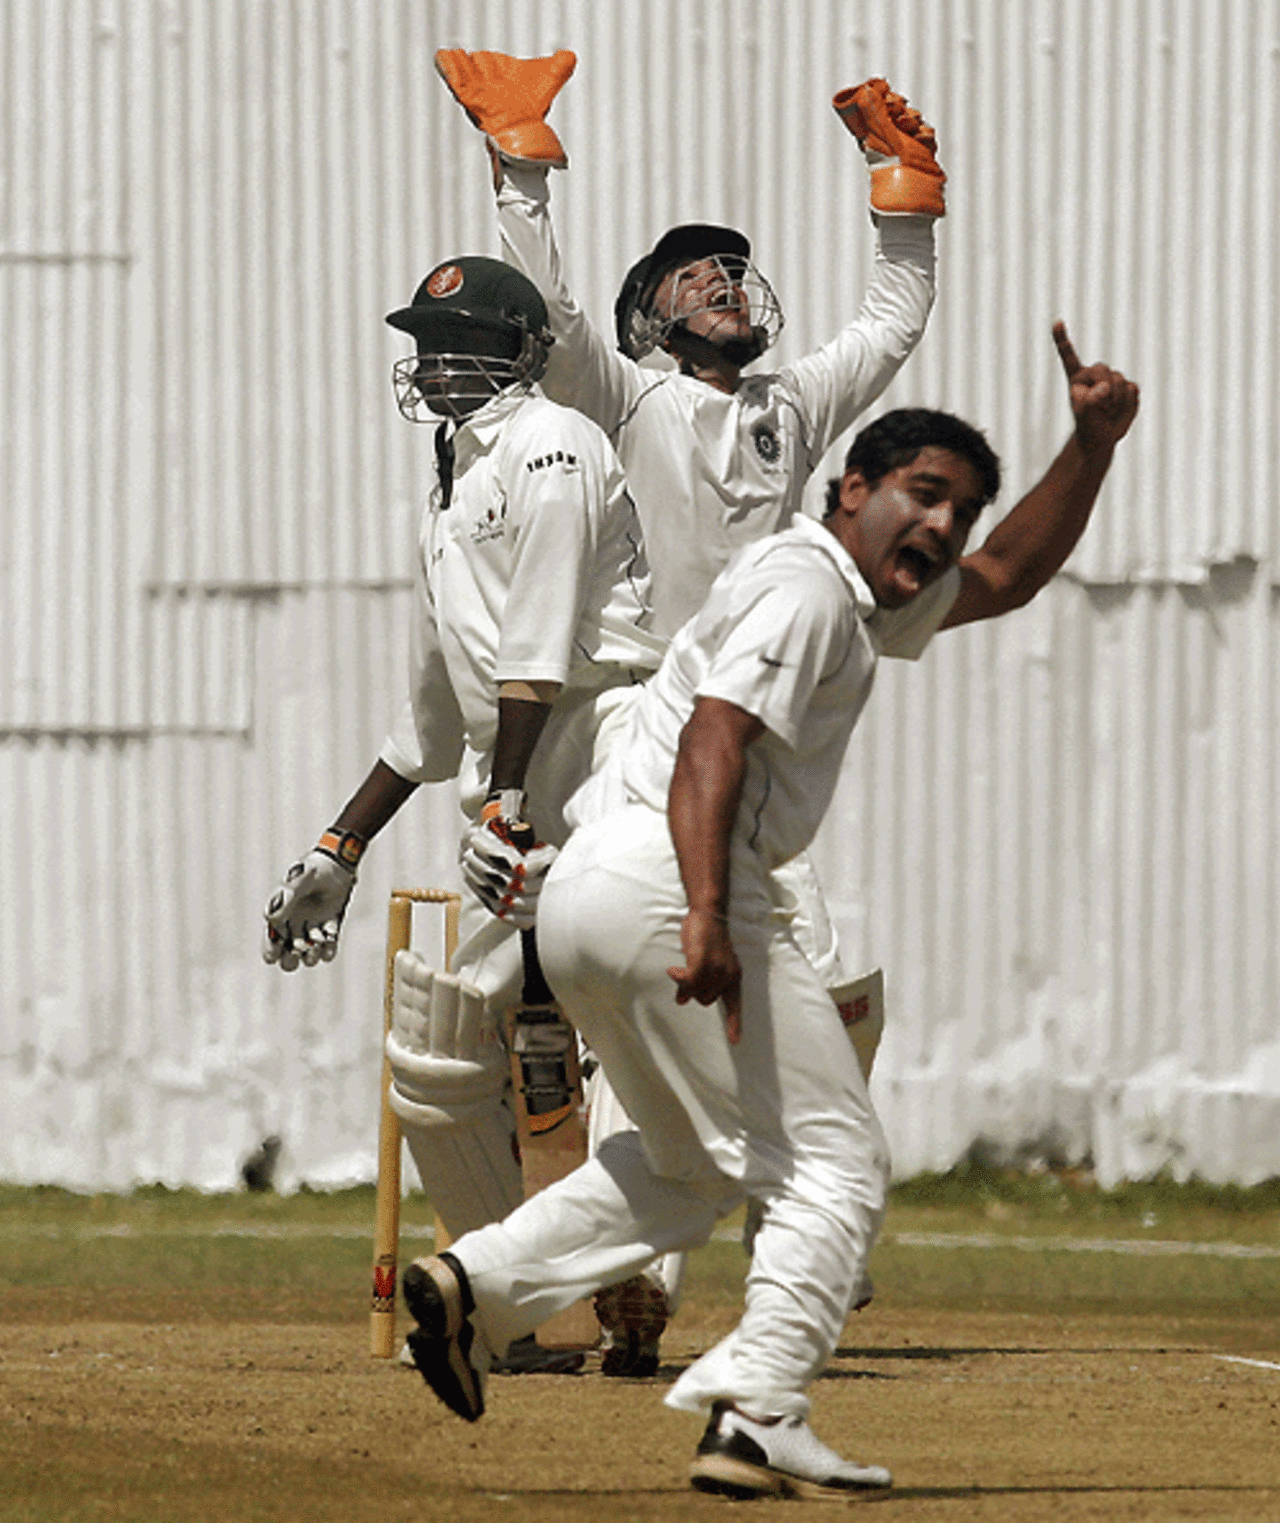 Rajesh Pawar appeals unsuccessfuly for the wicket of Tony Suji, Kenya v India A, Mombasa, 3rd day, August 12, 2007